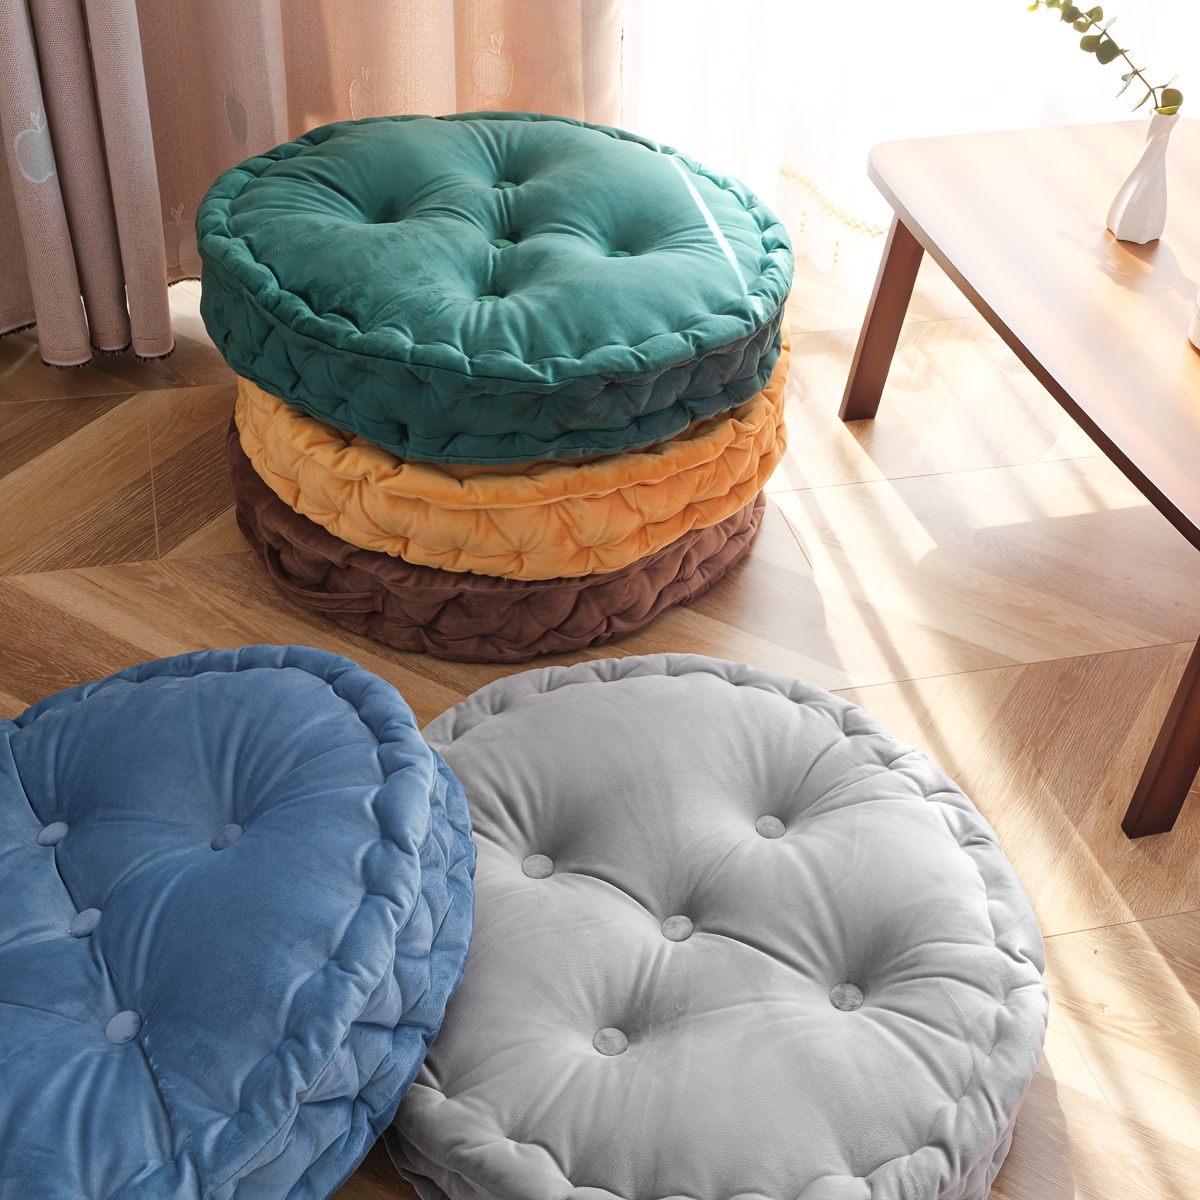 Seat Pillows for Chairs Cushions for Chairs Seat Cushion Student Classroom Office Sedentary Seat Cushion Dormitory Floor Chair Winter Small Stool Car